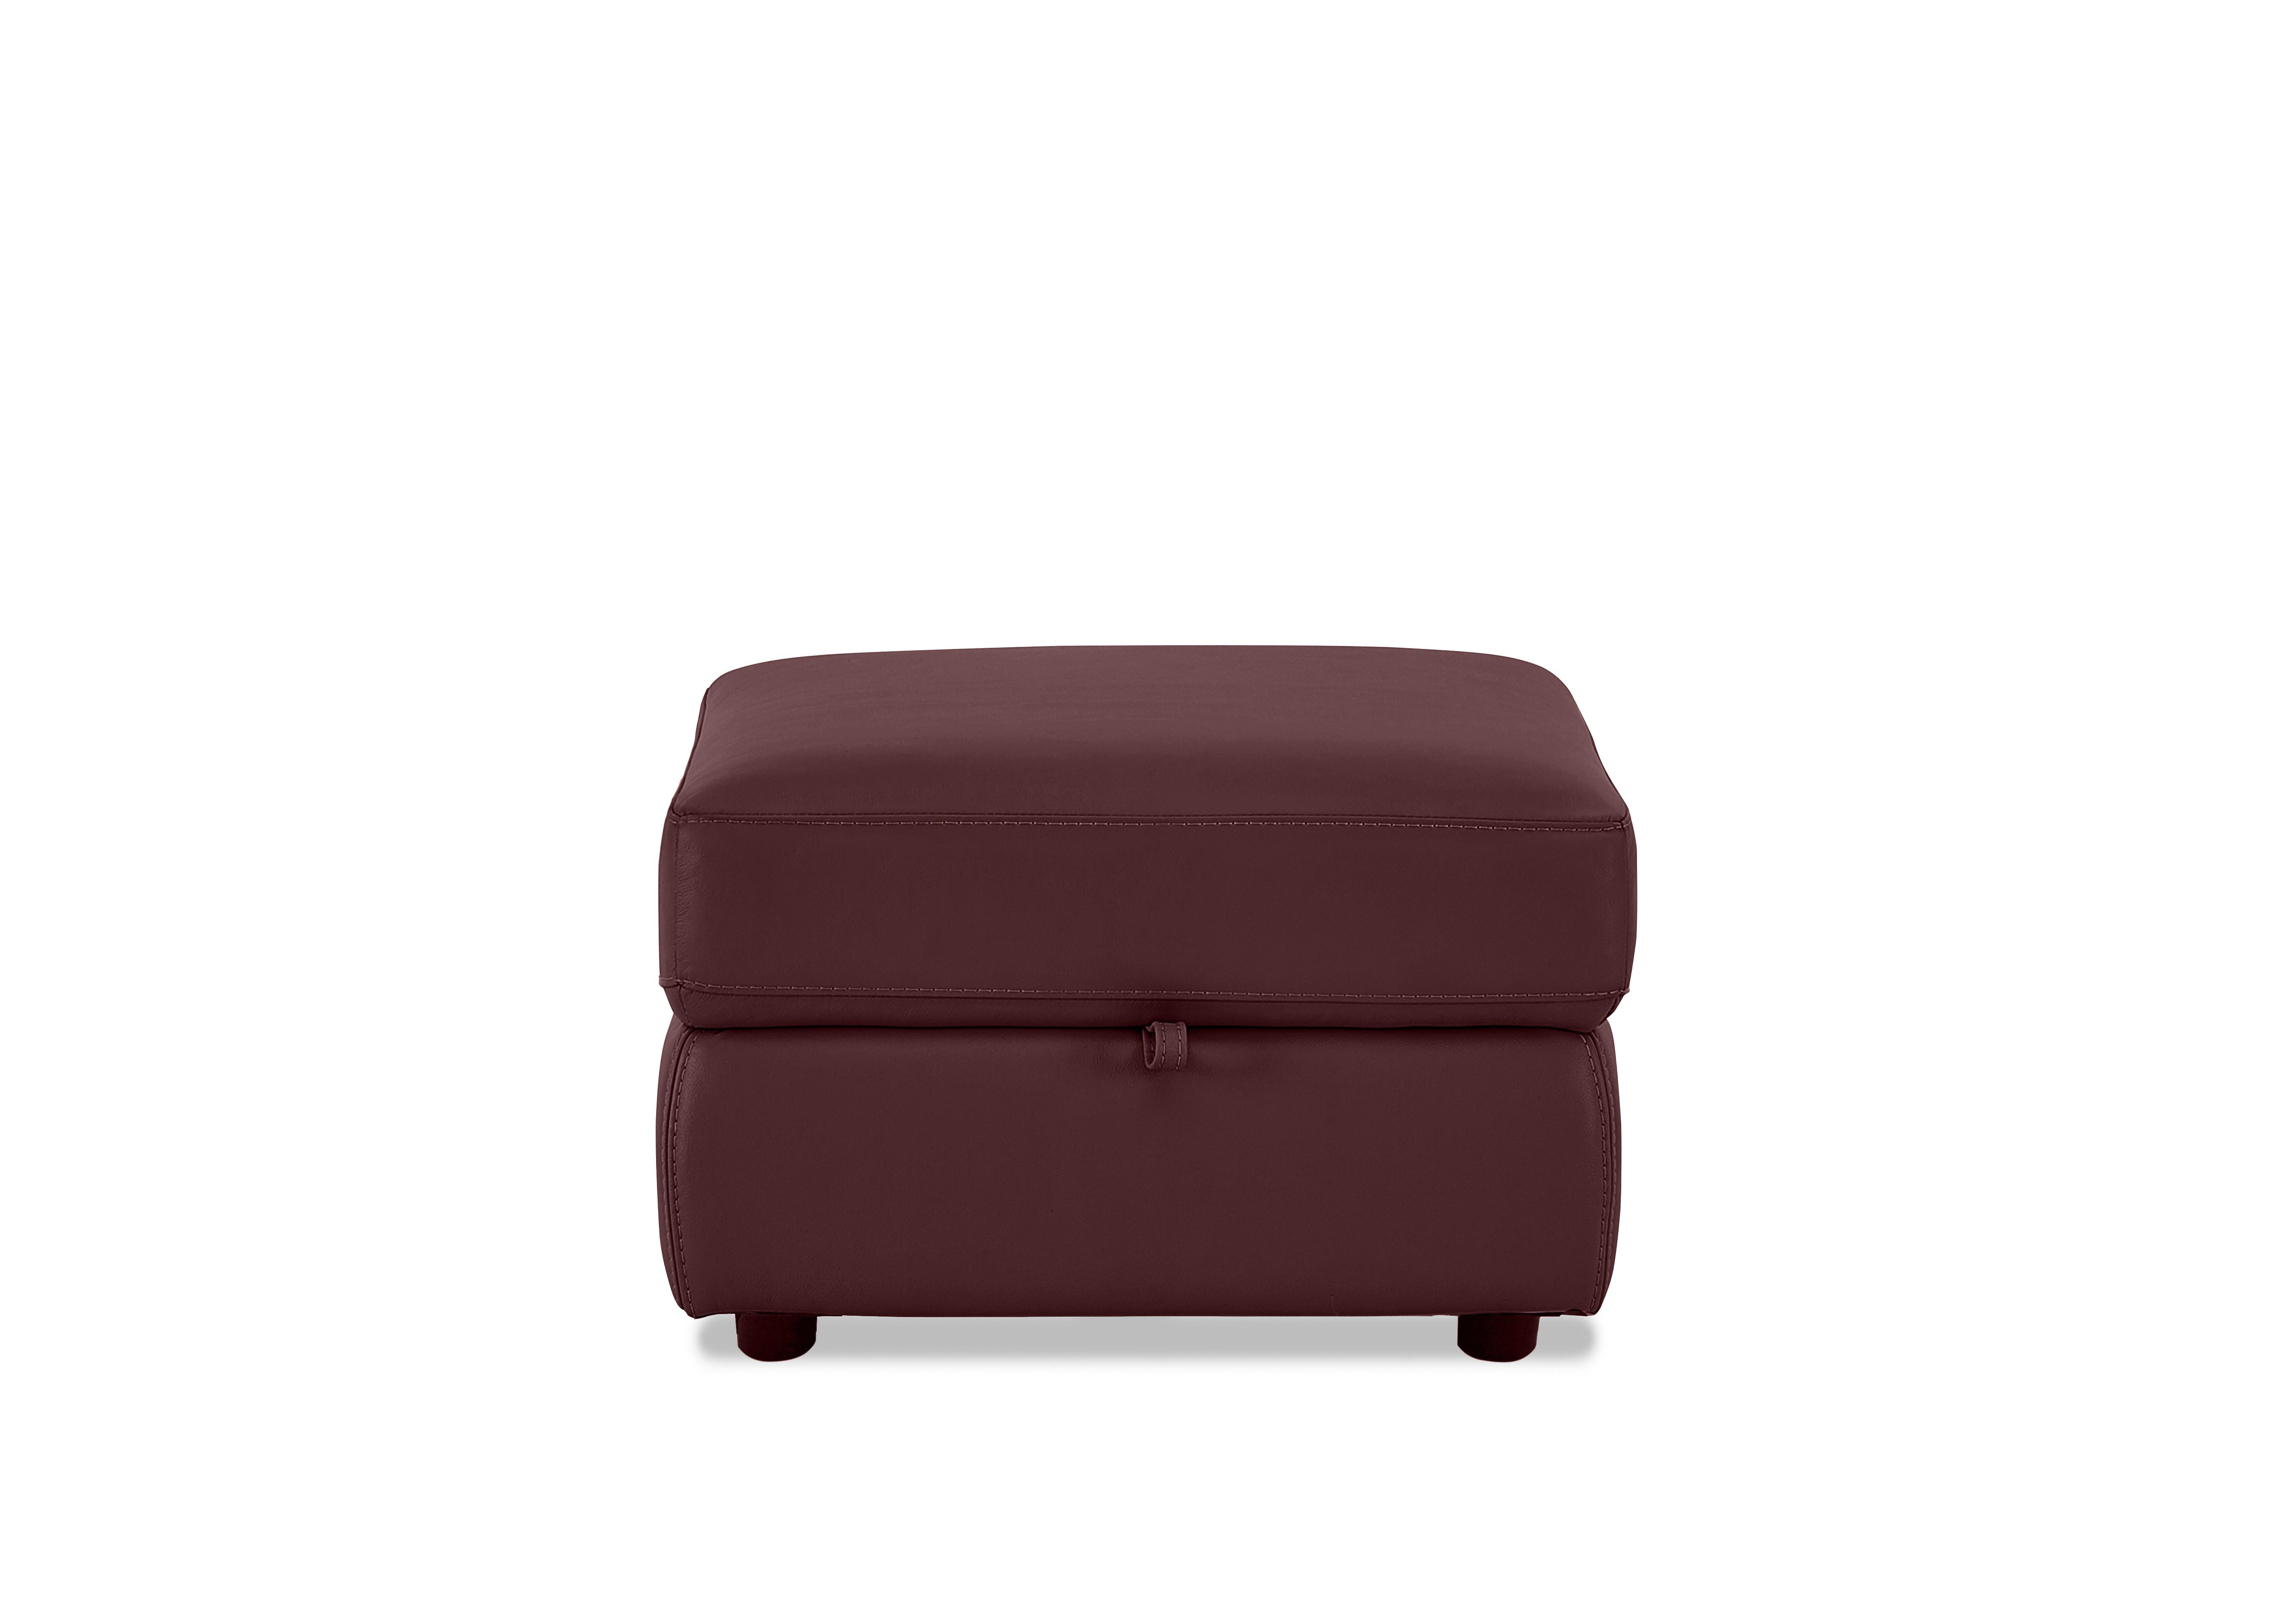 Touch Leather Storage Footstool in Bv-035c Deep Red on Furniture Village